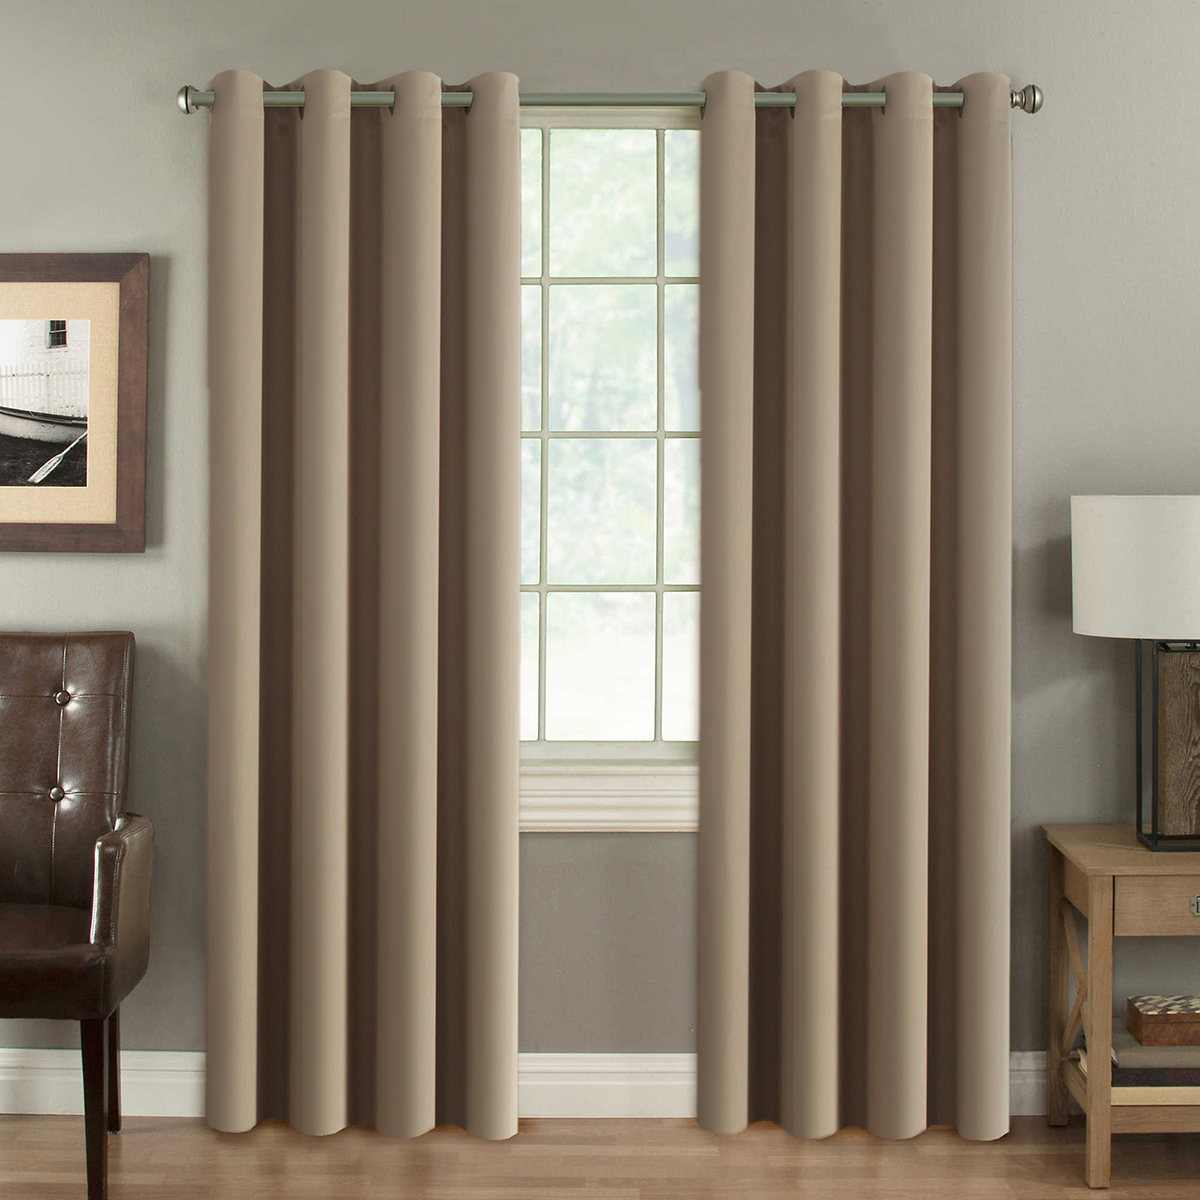 H.VERSAILTEX Blackout Thermal Insulated Room Darkening Winow Treatment  Extra Long Curtains / Drapes,Grommet Panels (Set of 2,52 by 108 -  Inch,Solid Khaki)